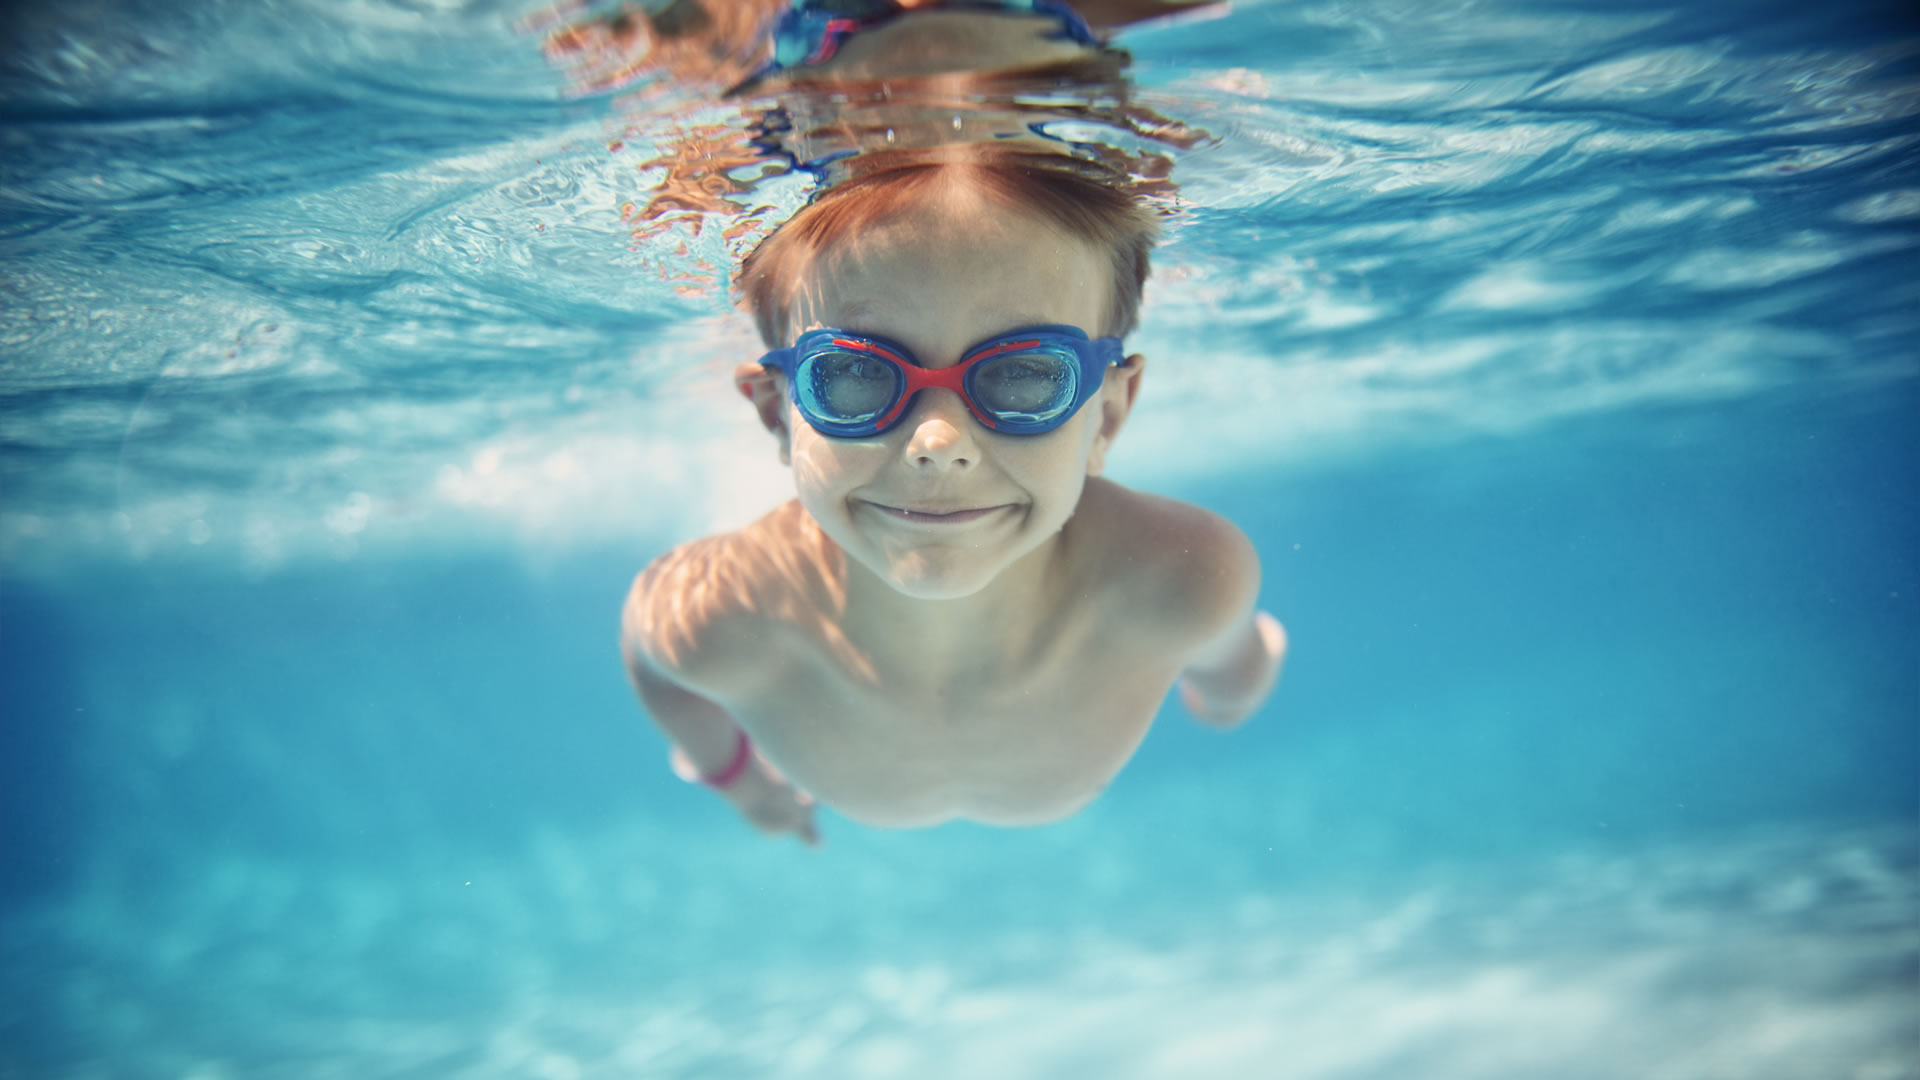 Pool Hygiene and Pool Safety Tips for Children